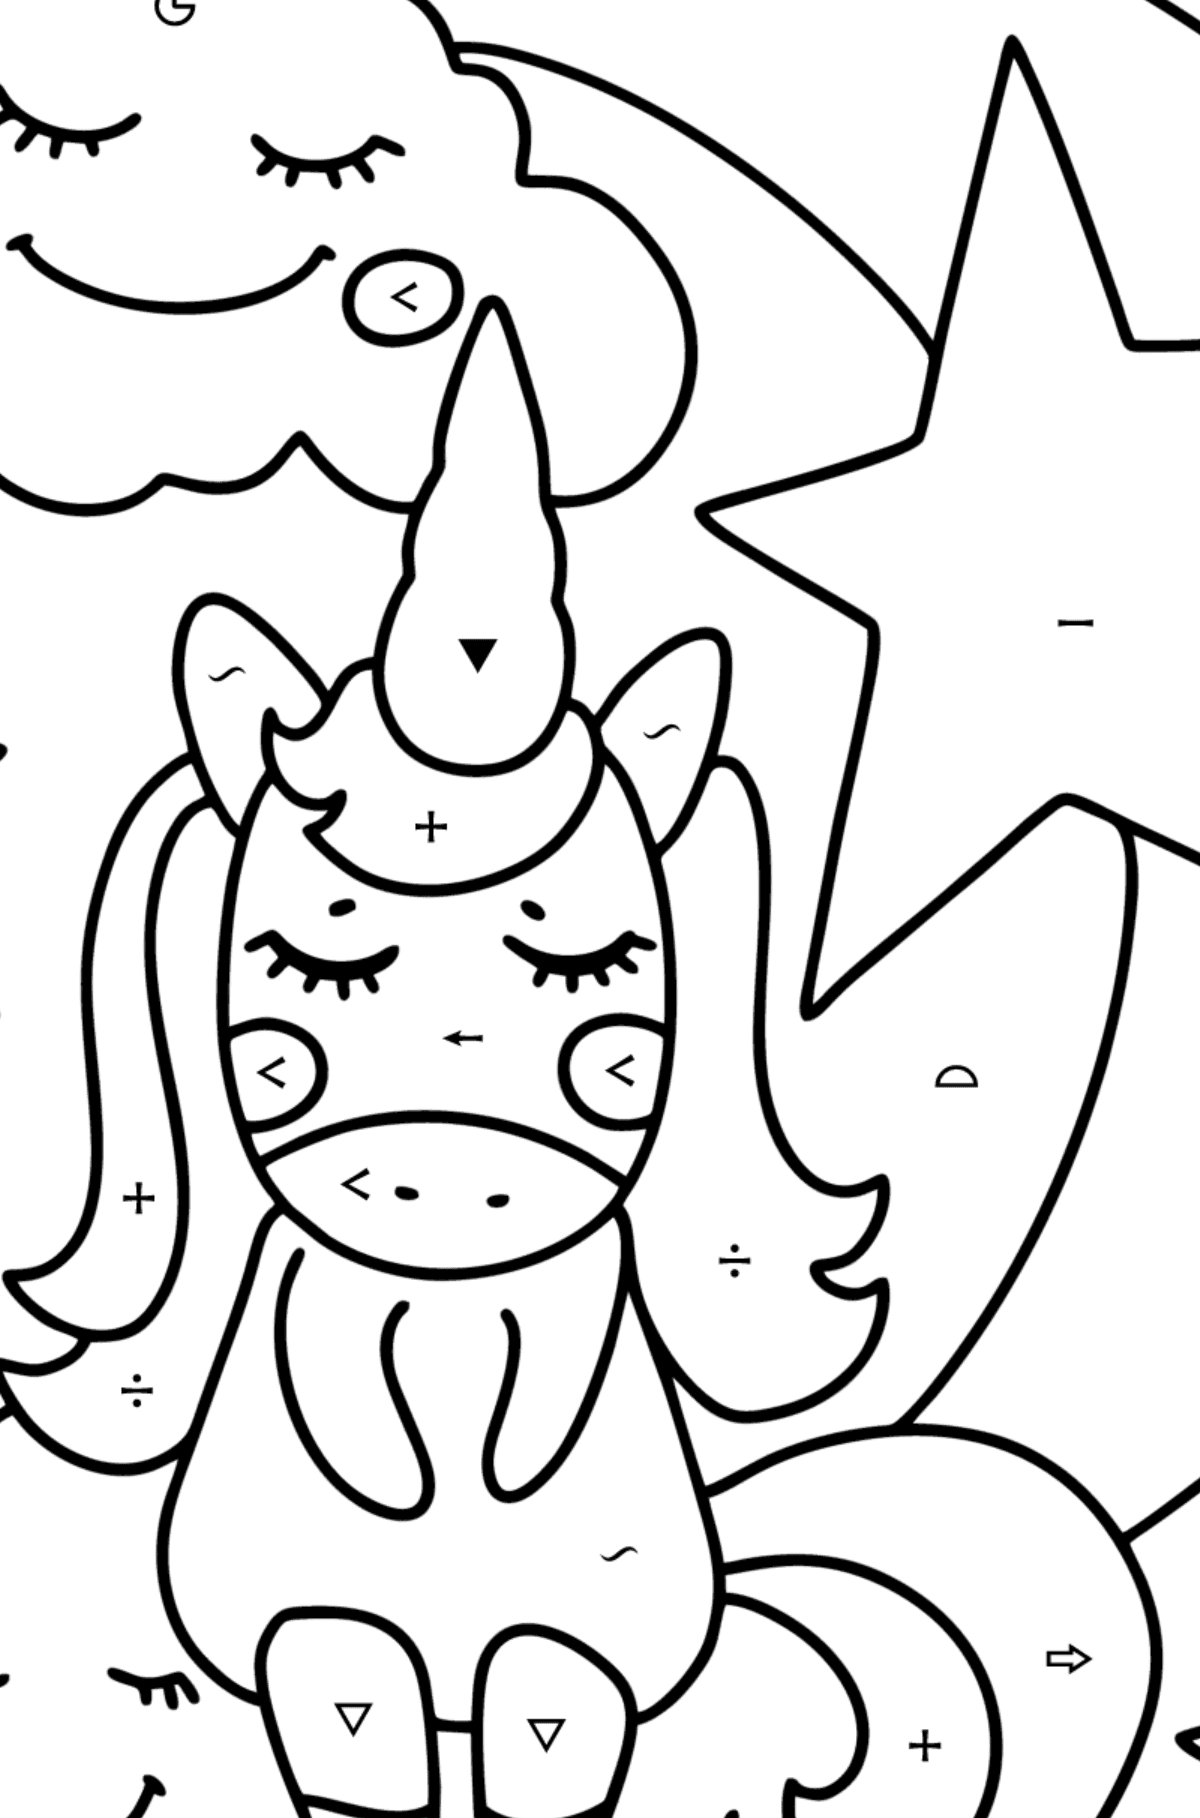 Star unicorn coloring page - Coloring by Symbols and Geometric Shapes for Kids